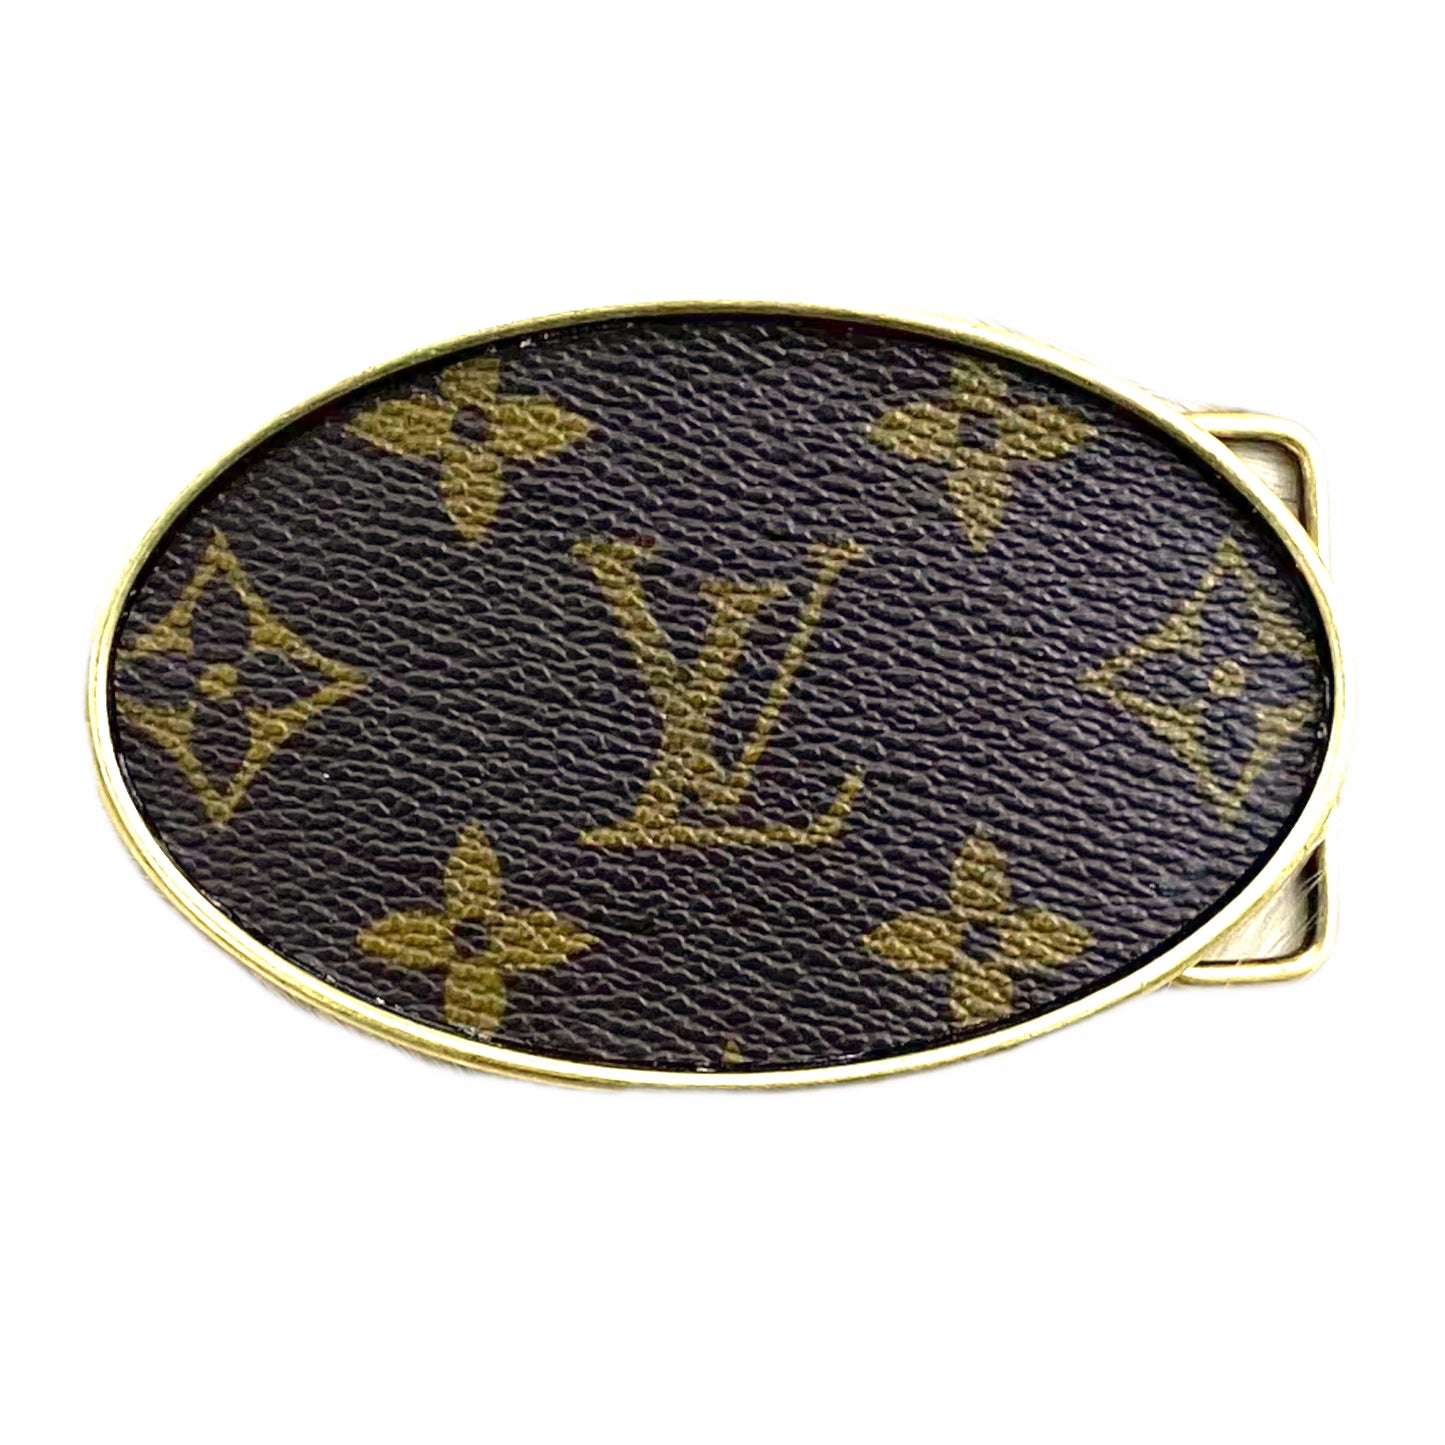 Upcycled LV belt buckle